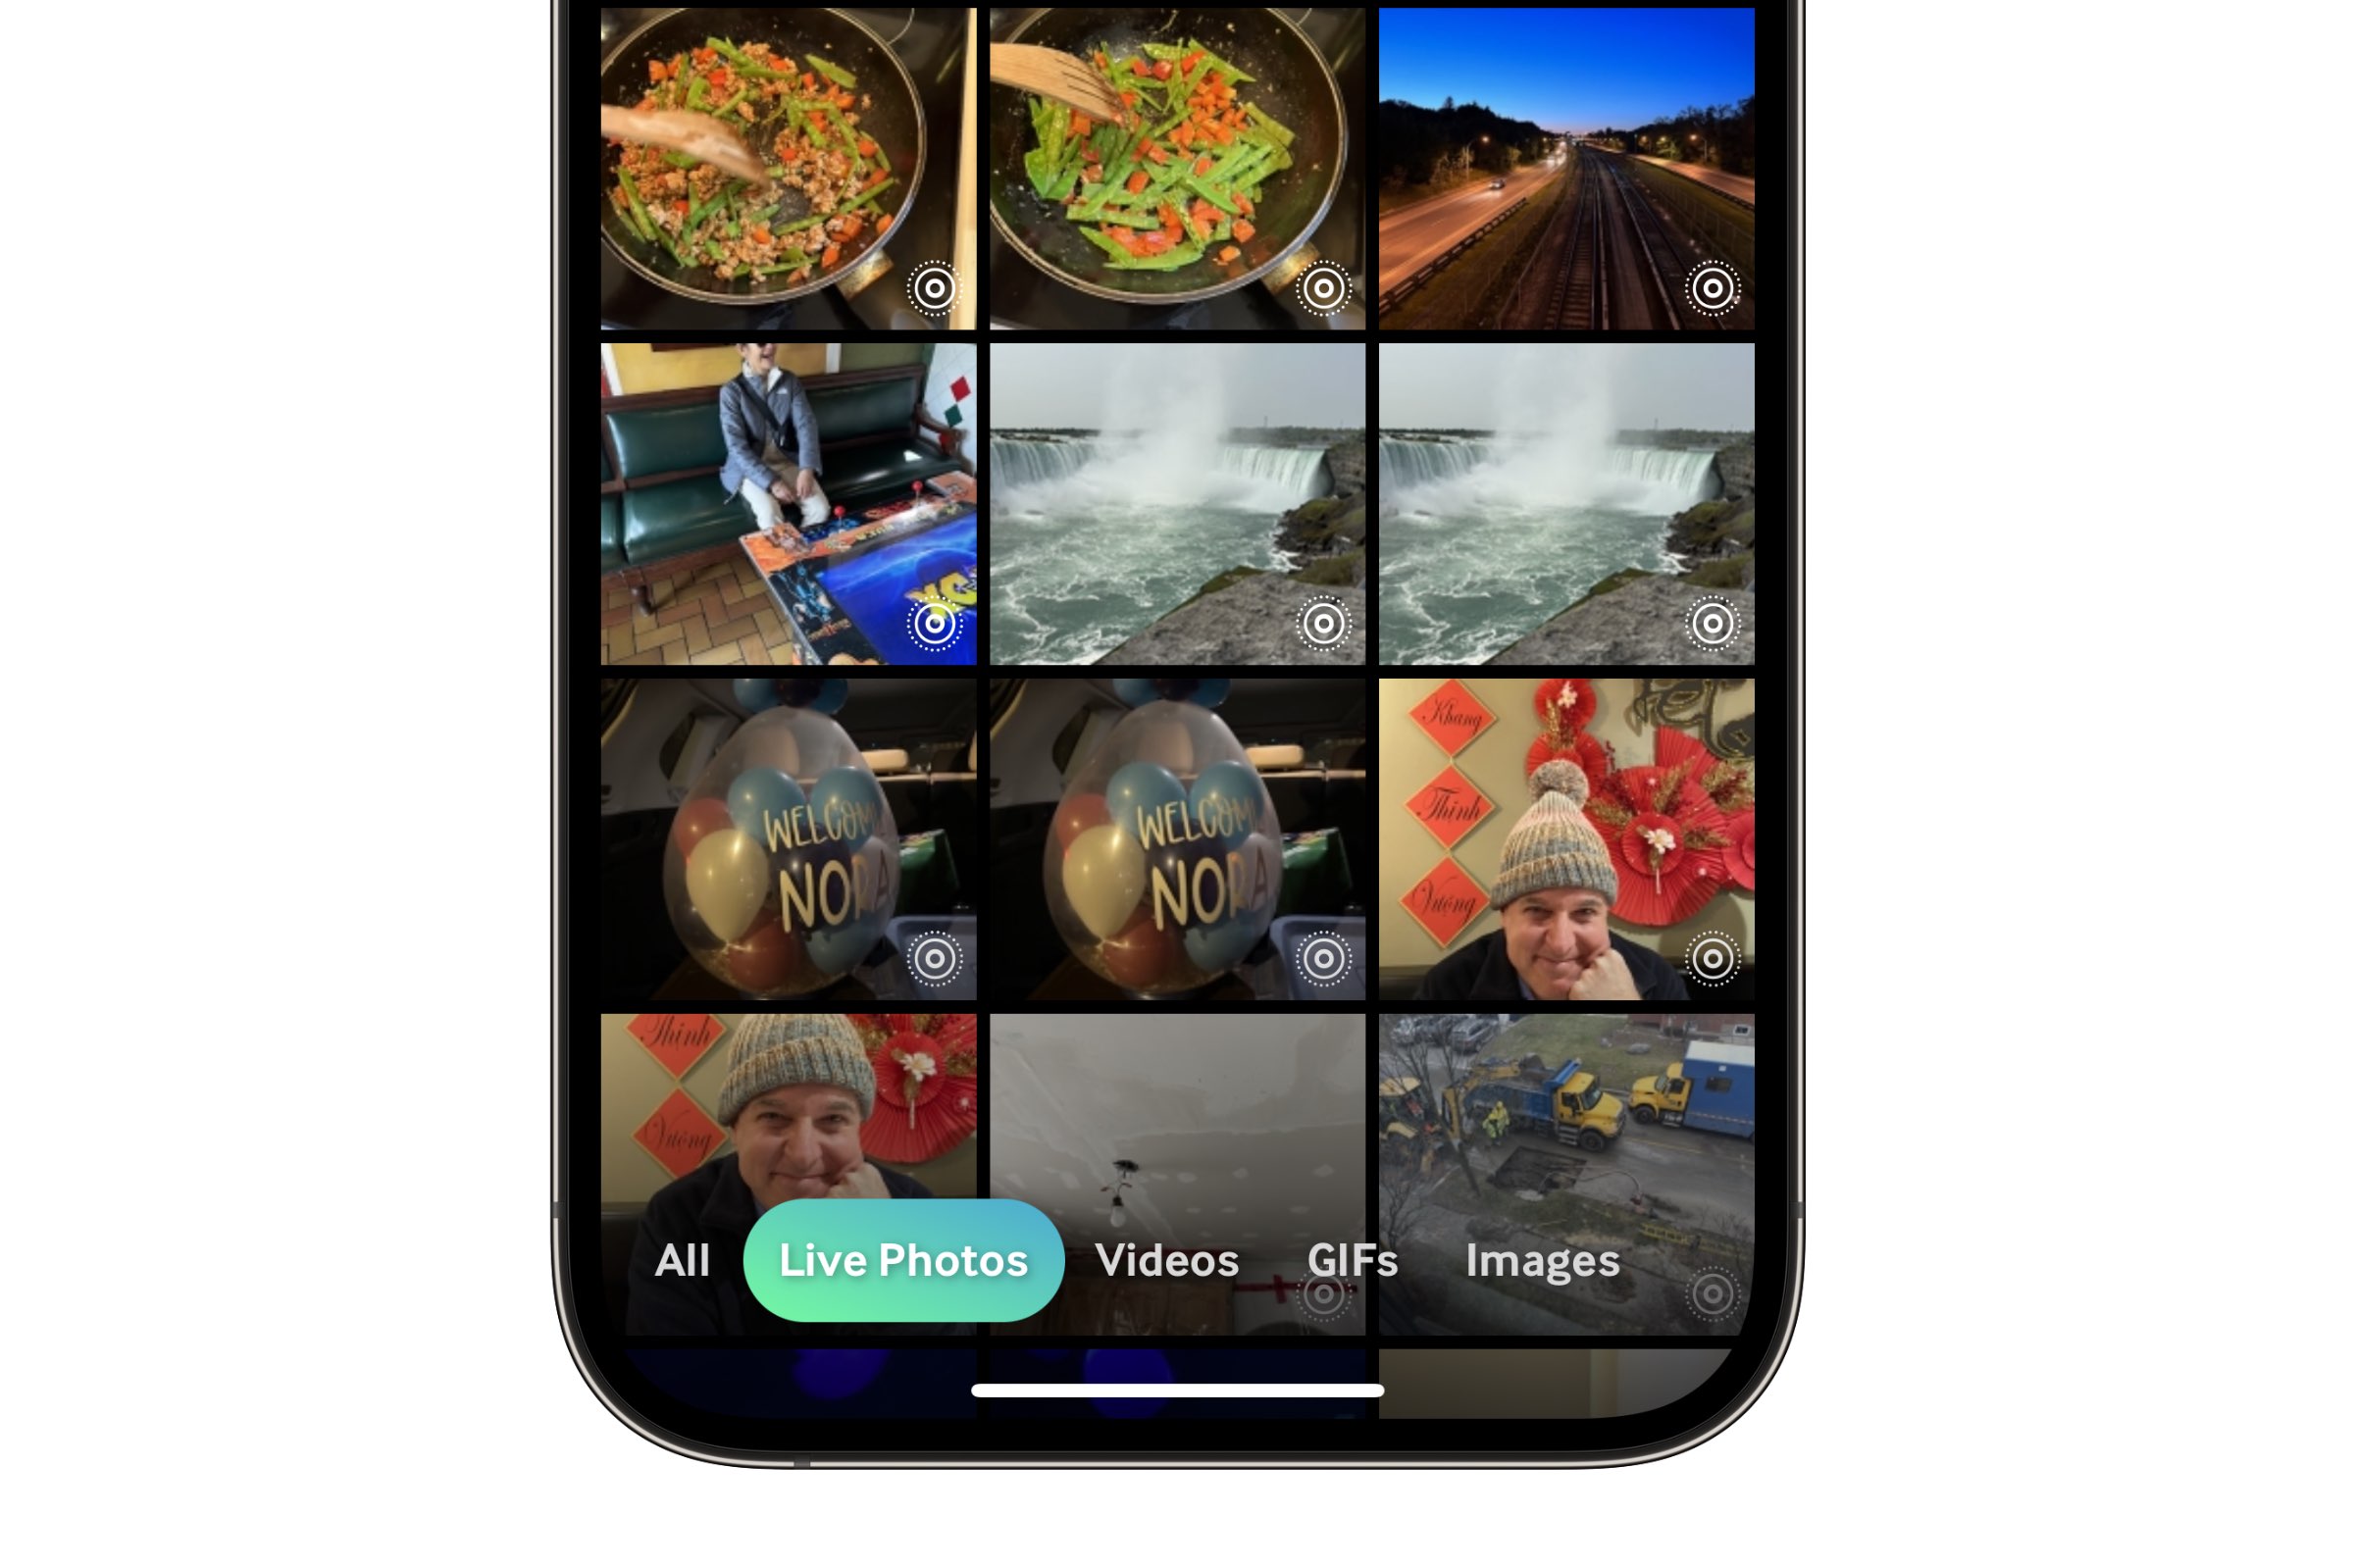 iPhone showing Giphy browsing for Live Photos.